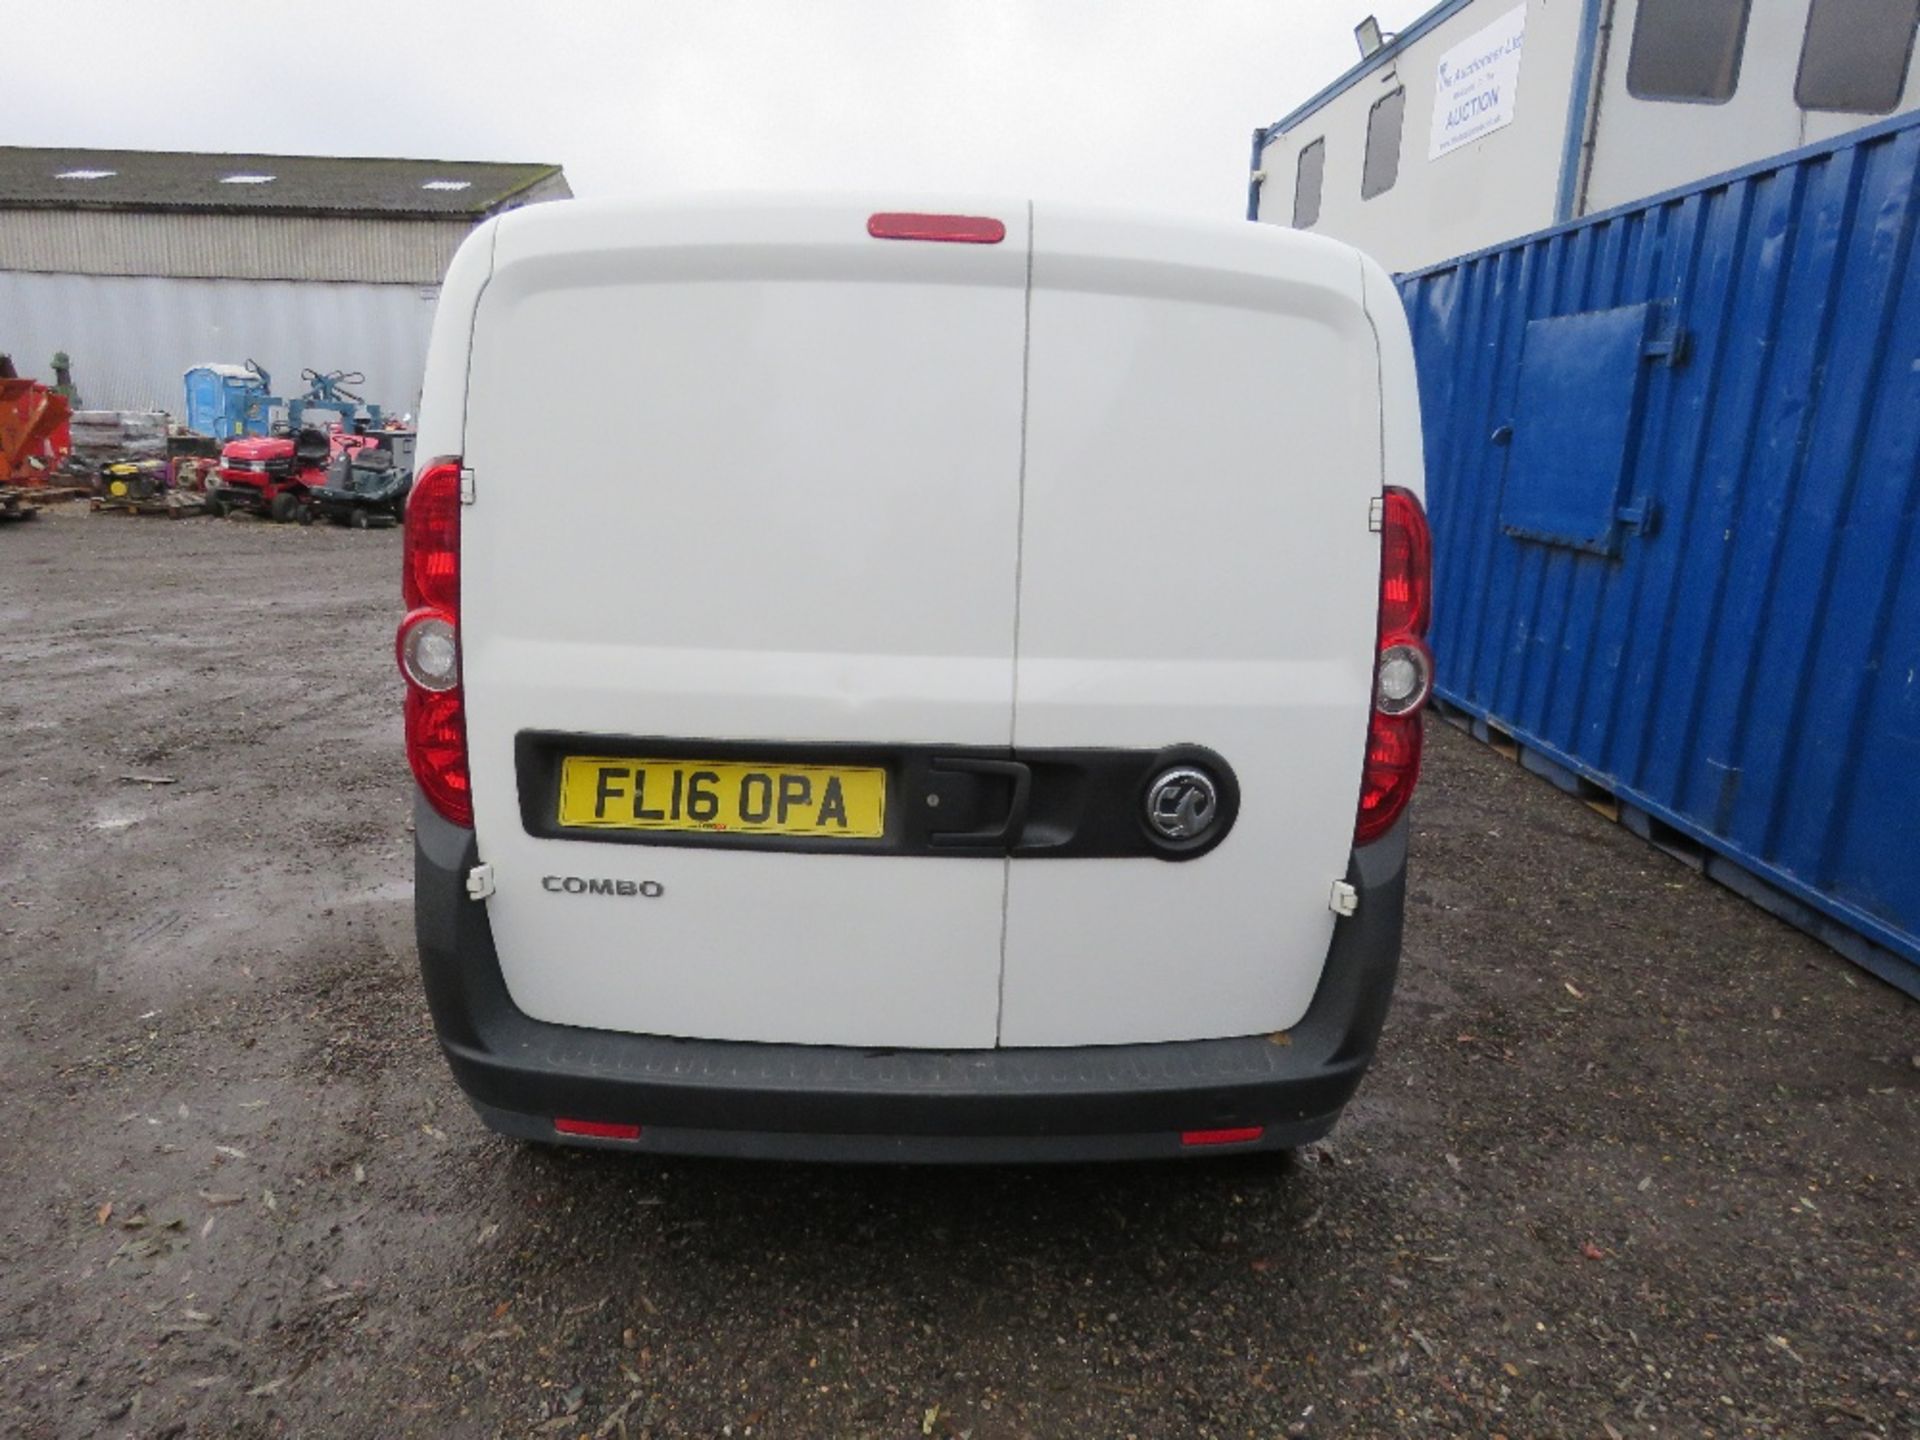 VAUXHALL COMBO 5 SEATER VAN REG: FL16 OPA. 93, 507 RECORDED MILES. WITH V5. TESTED UNTIL 2/3/24. OWN - Image 7 of 19